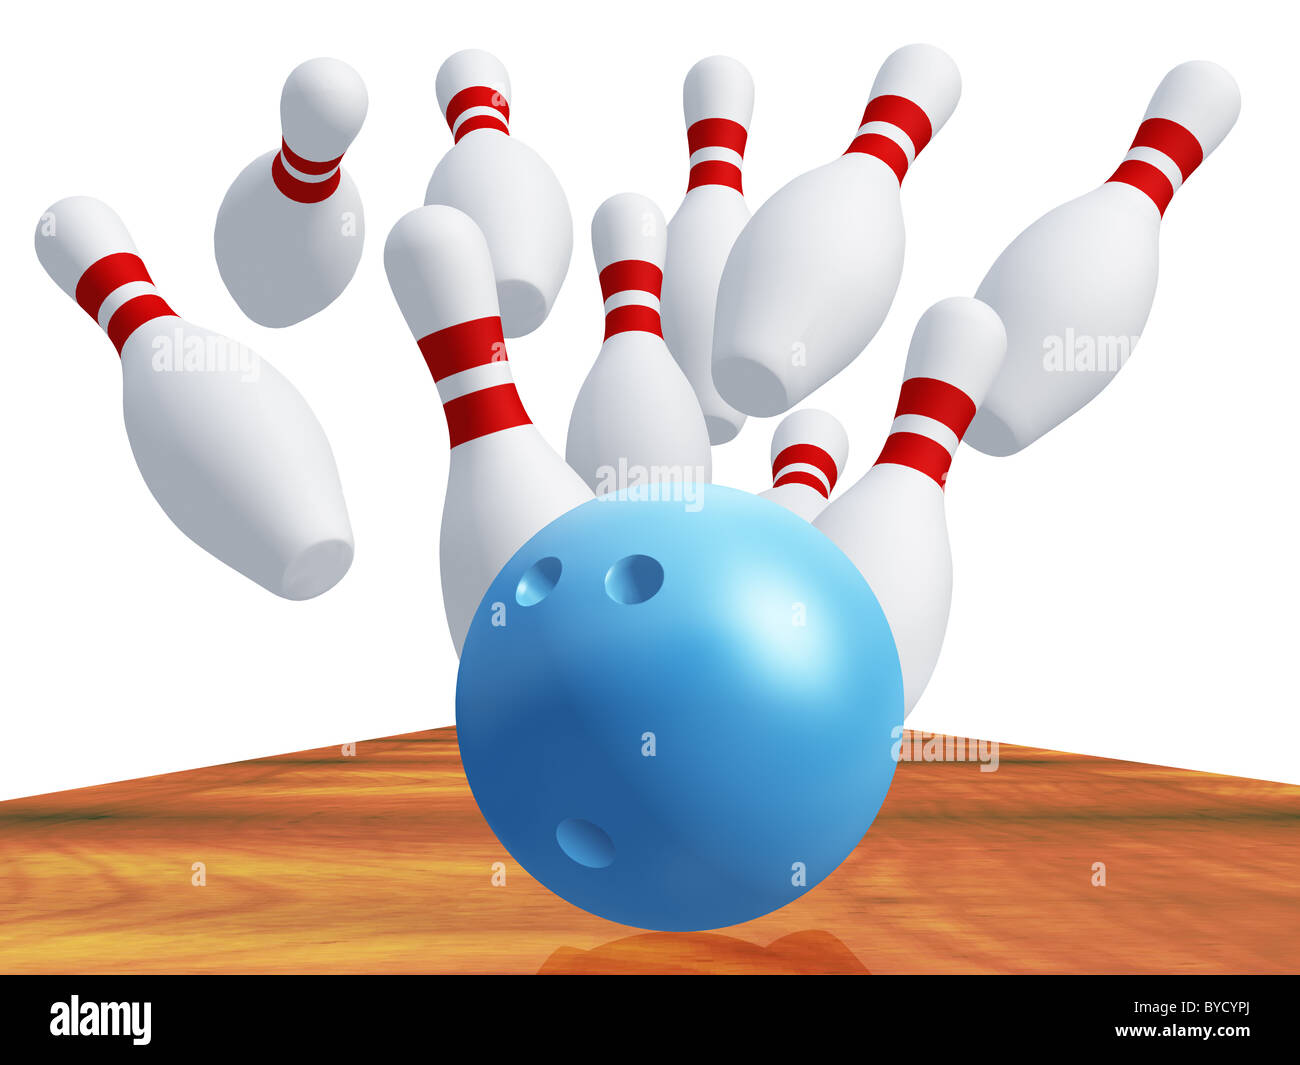 Bowling 3D Graphics, Designs & Templates from GraphicRiver